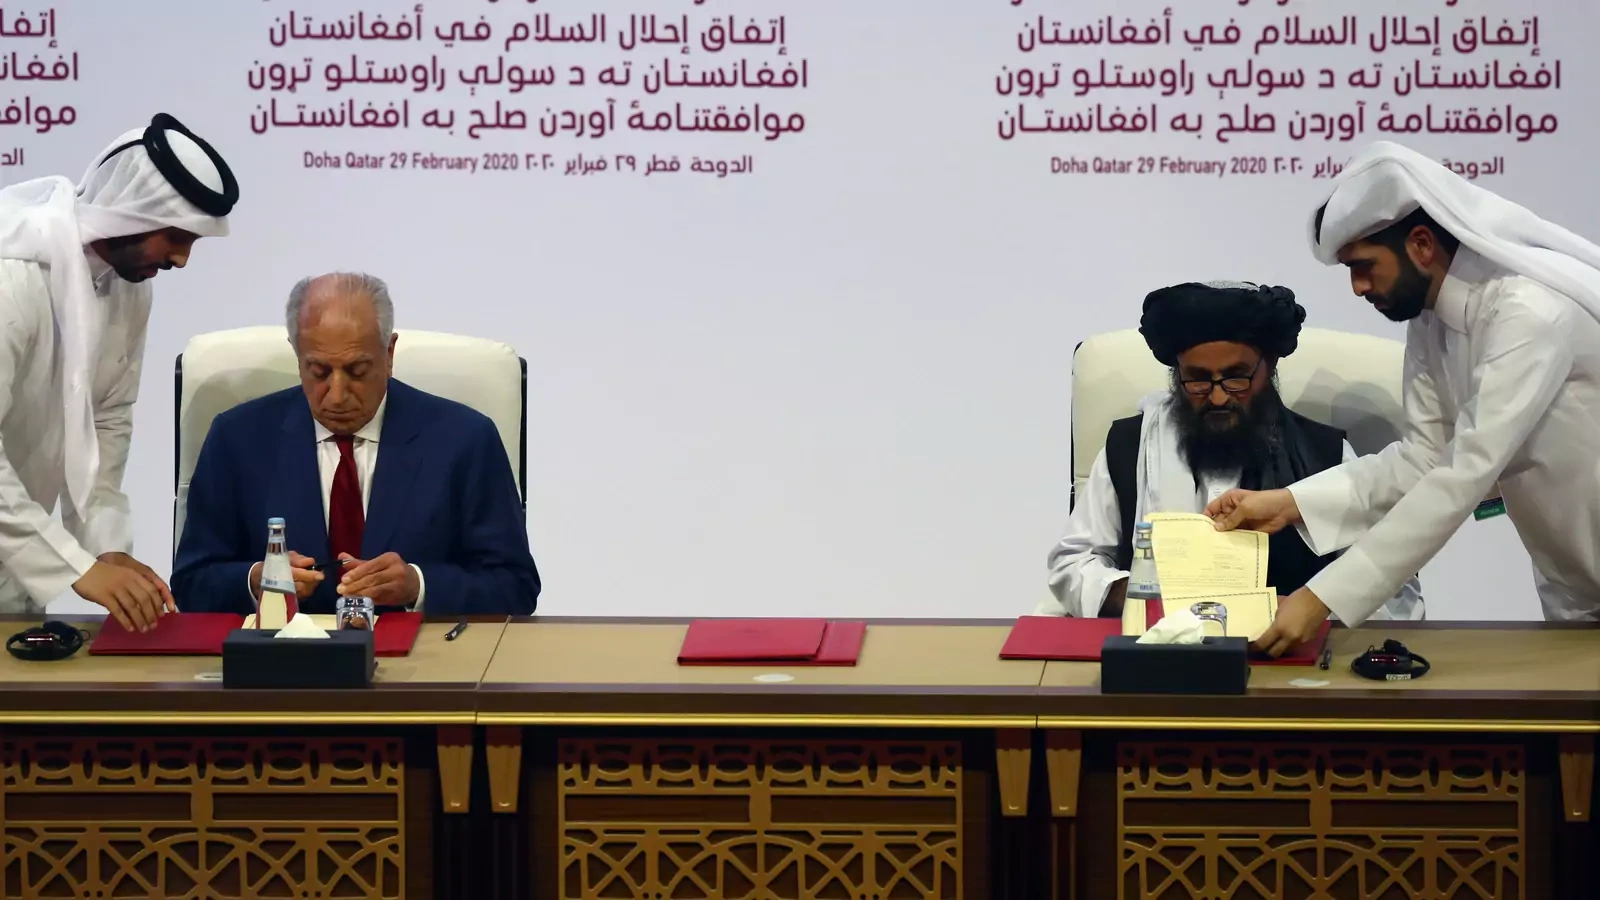 Mullah Abdul Ghani Baradar, the leader of the Taliban delegation, signs an agreement with Zalmay Khalilzad, U.S. envoy for peace in Afghanistan, at a signing agreement ceremony between members of Afghanistan's Taliban and the U.S. in Doha, Qatar. 